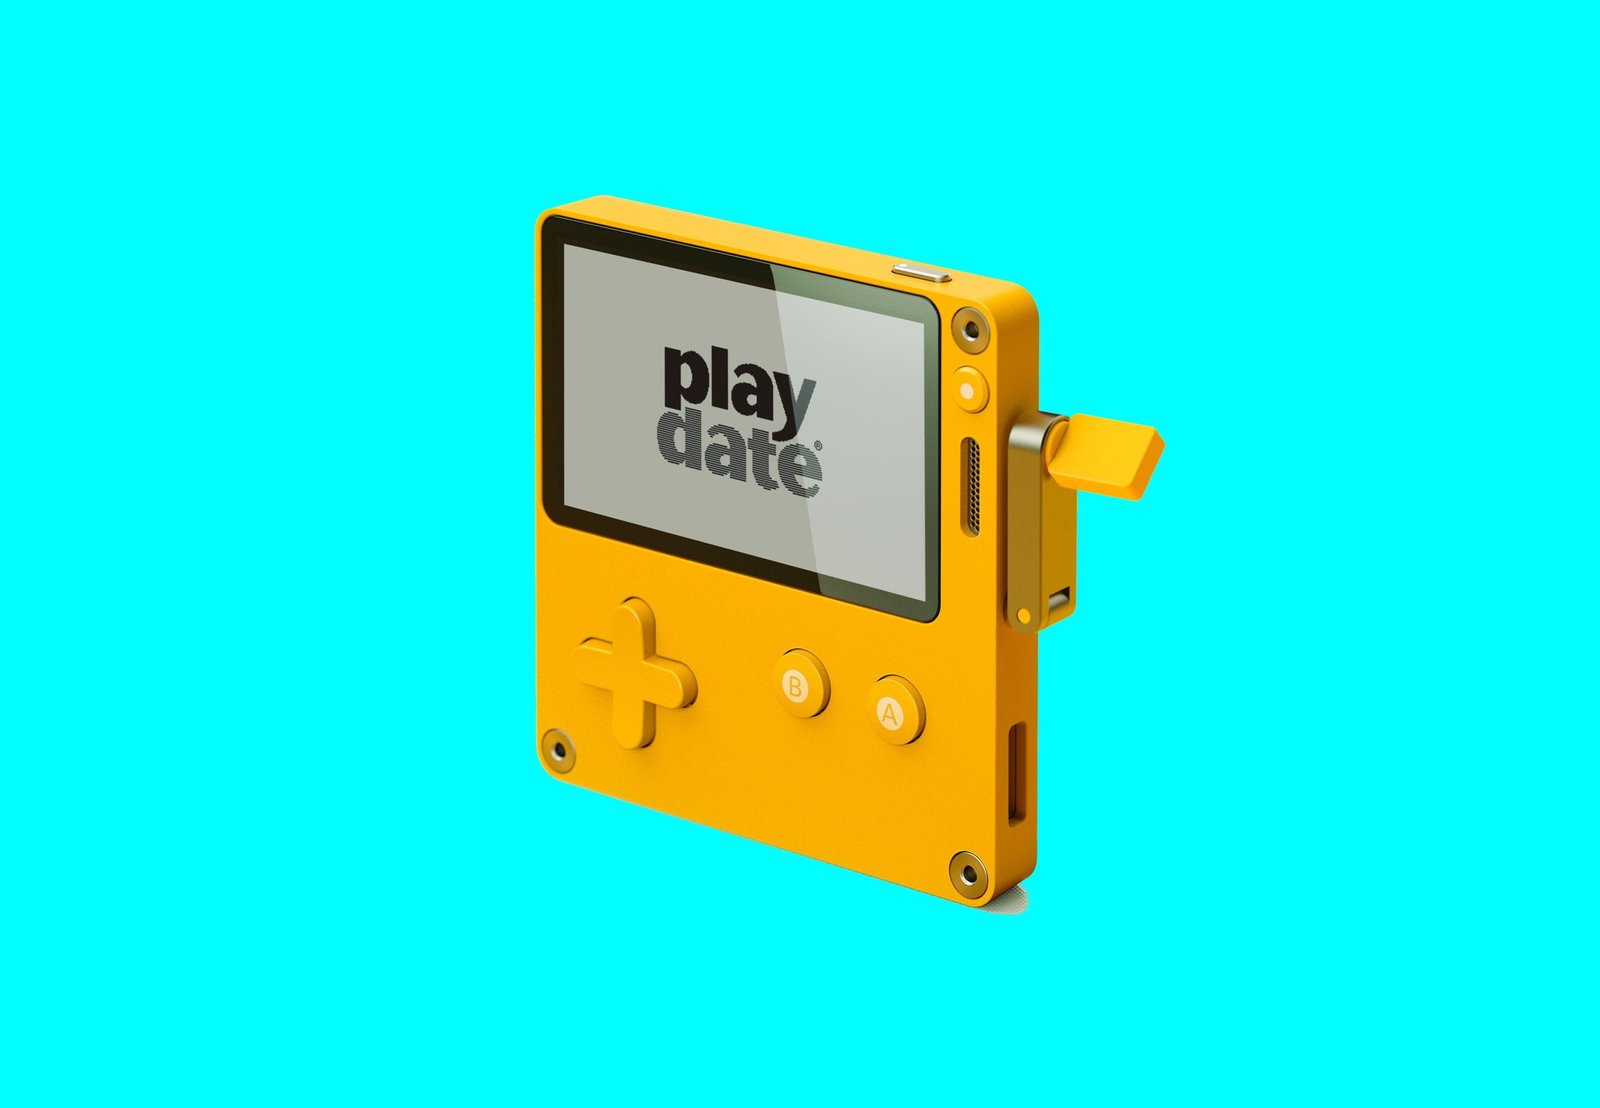 Playdate Pre-orders Open Thursday July 29th